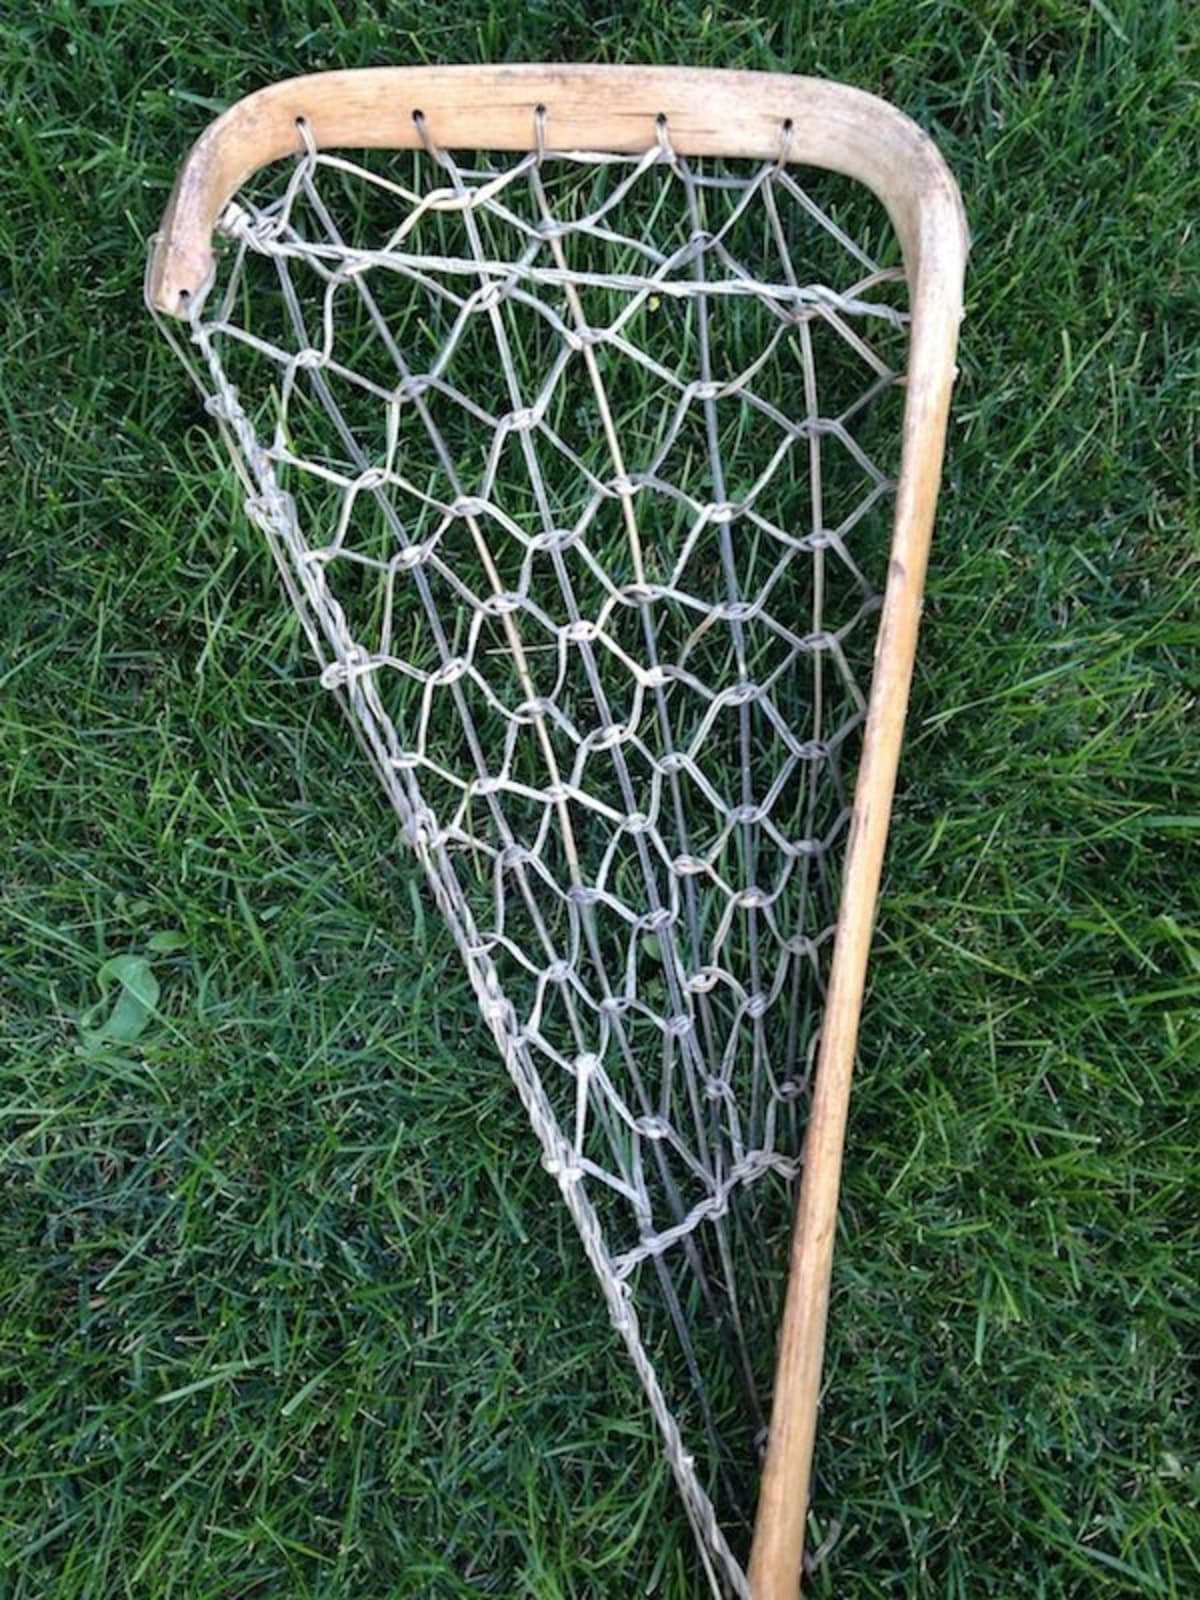 Pair of Wood Lacrosse Sticks, Lot, Sotheby's